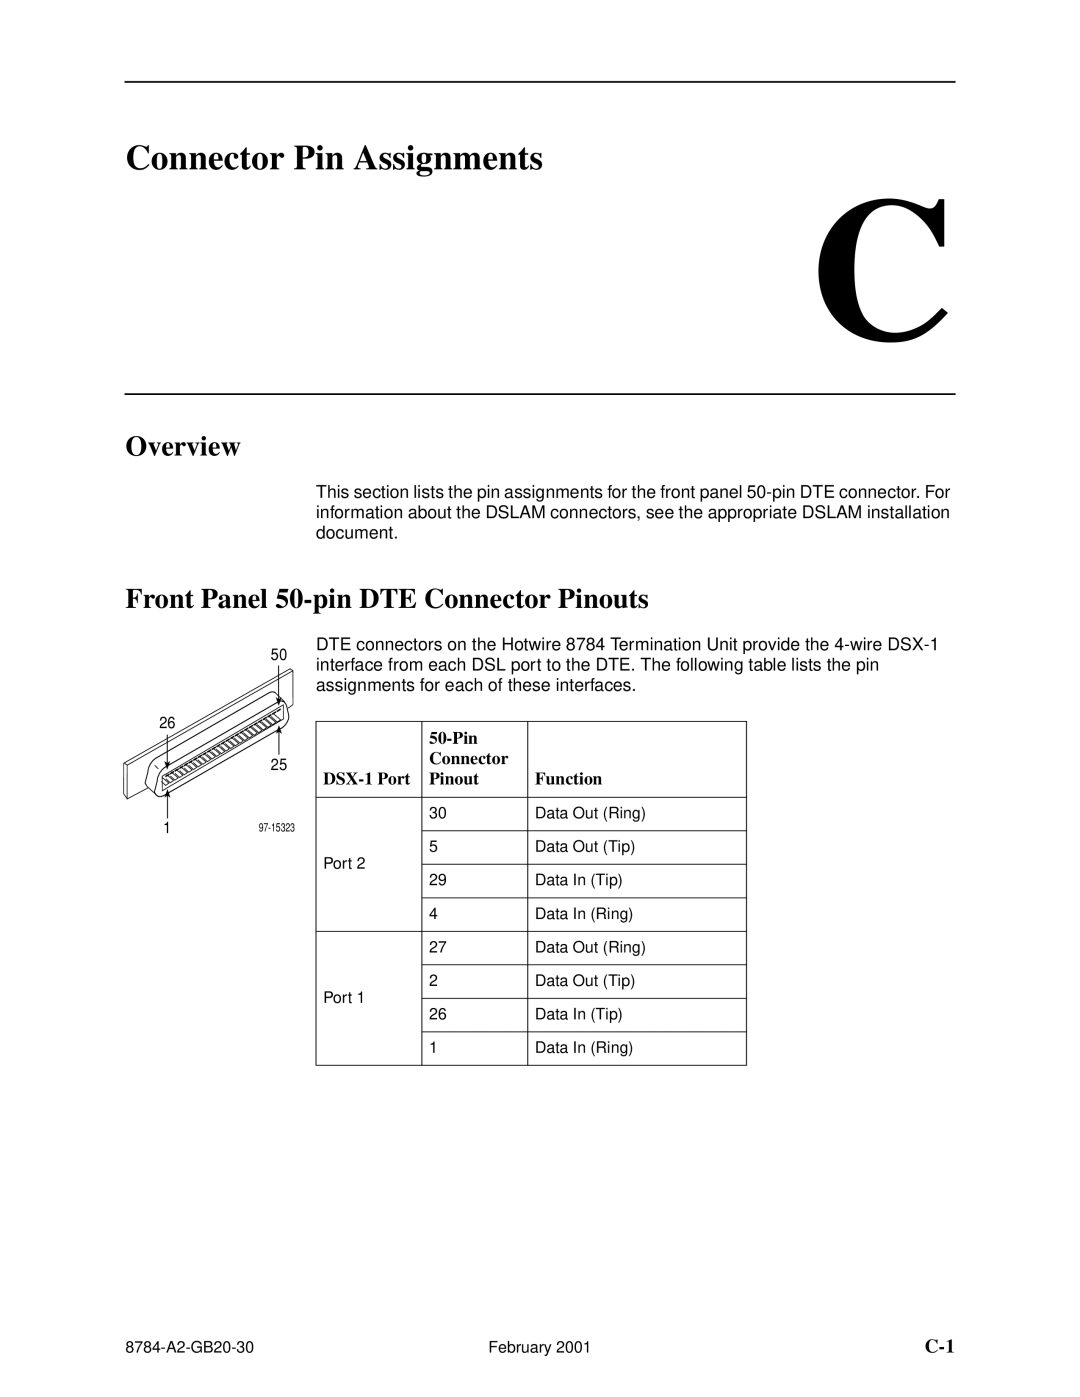 Paradyne 8784 manual Connector Pin Assignments, Front Panel 50-pin DTE Connector Pinouts, Overview 